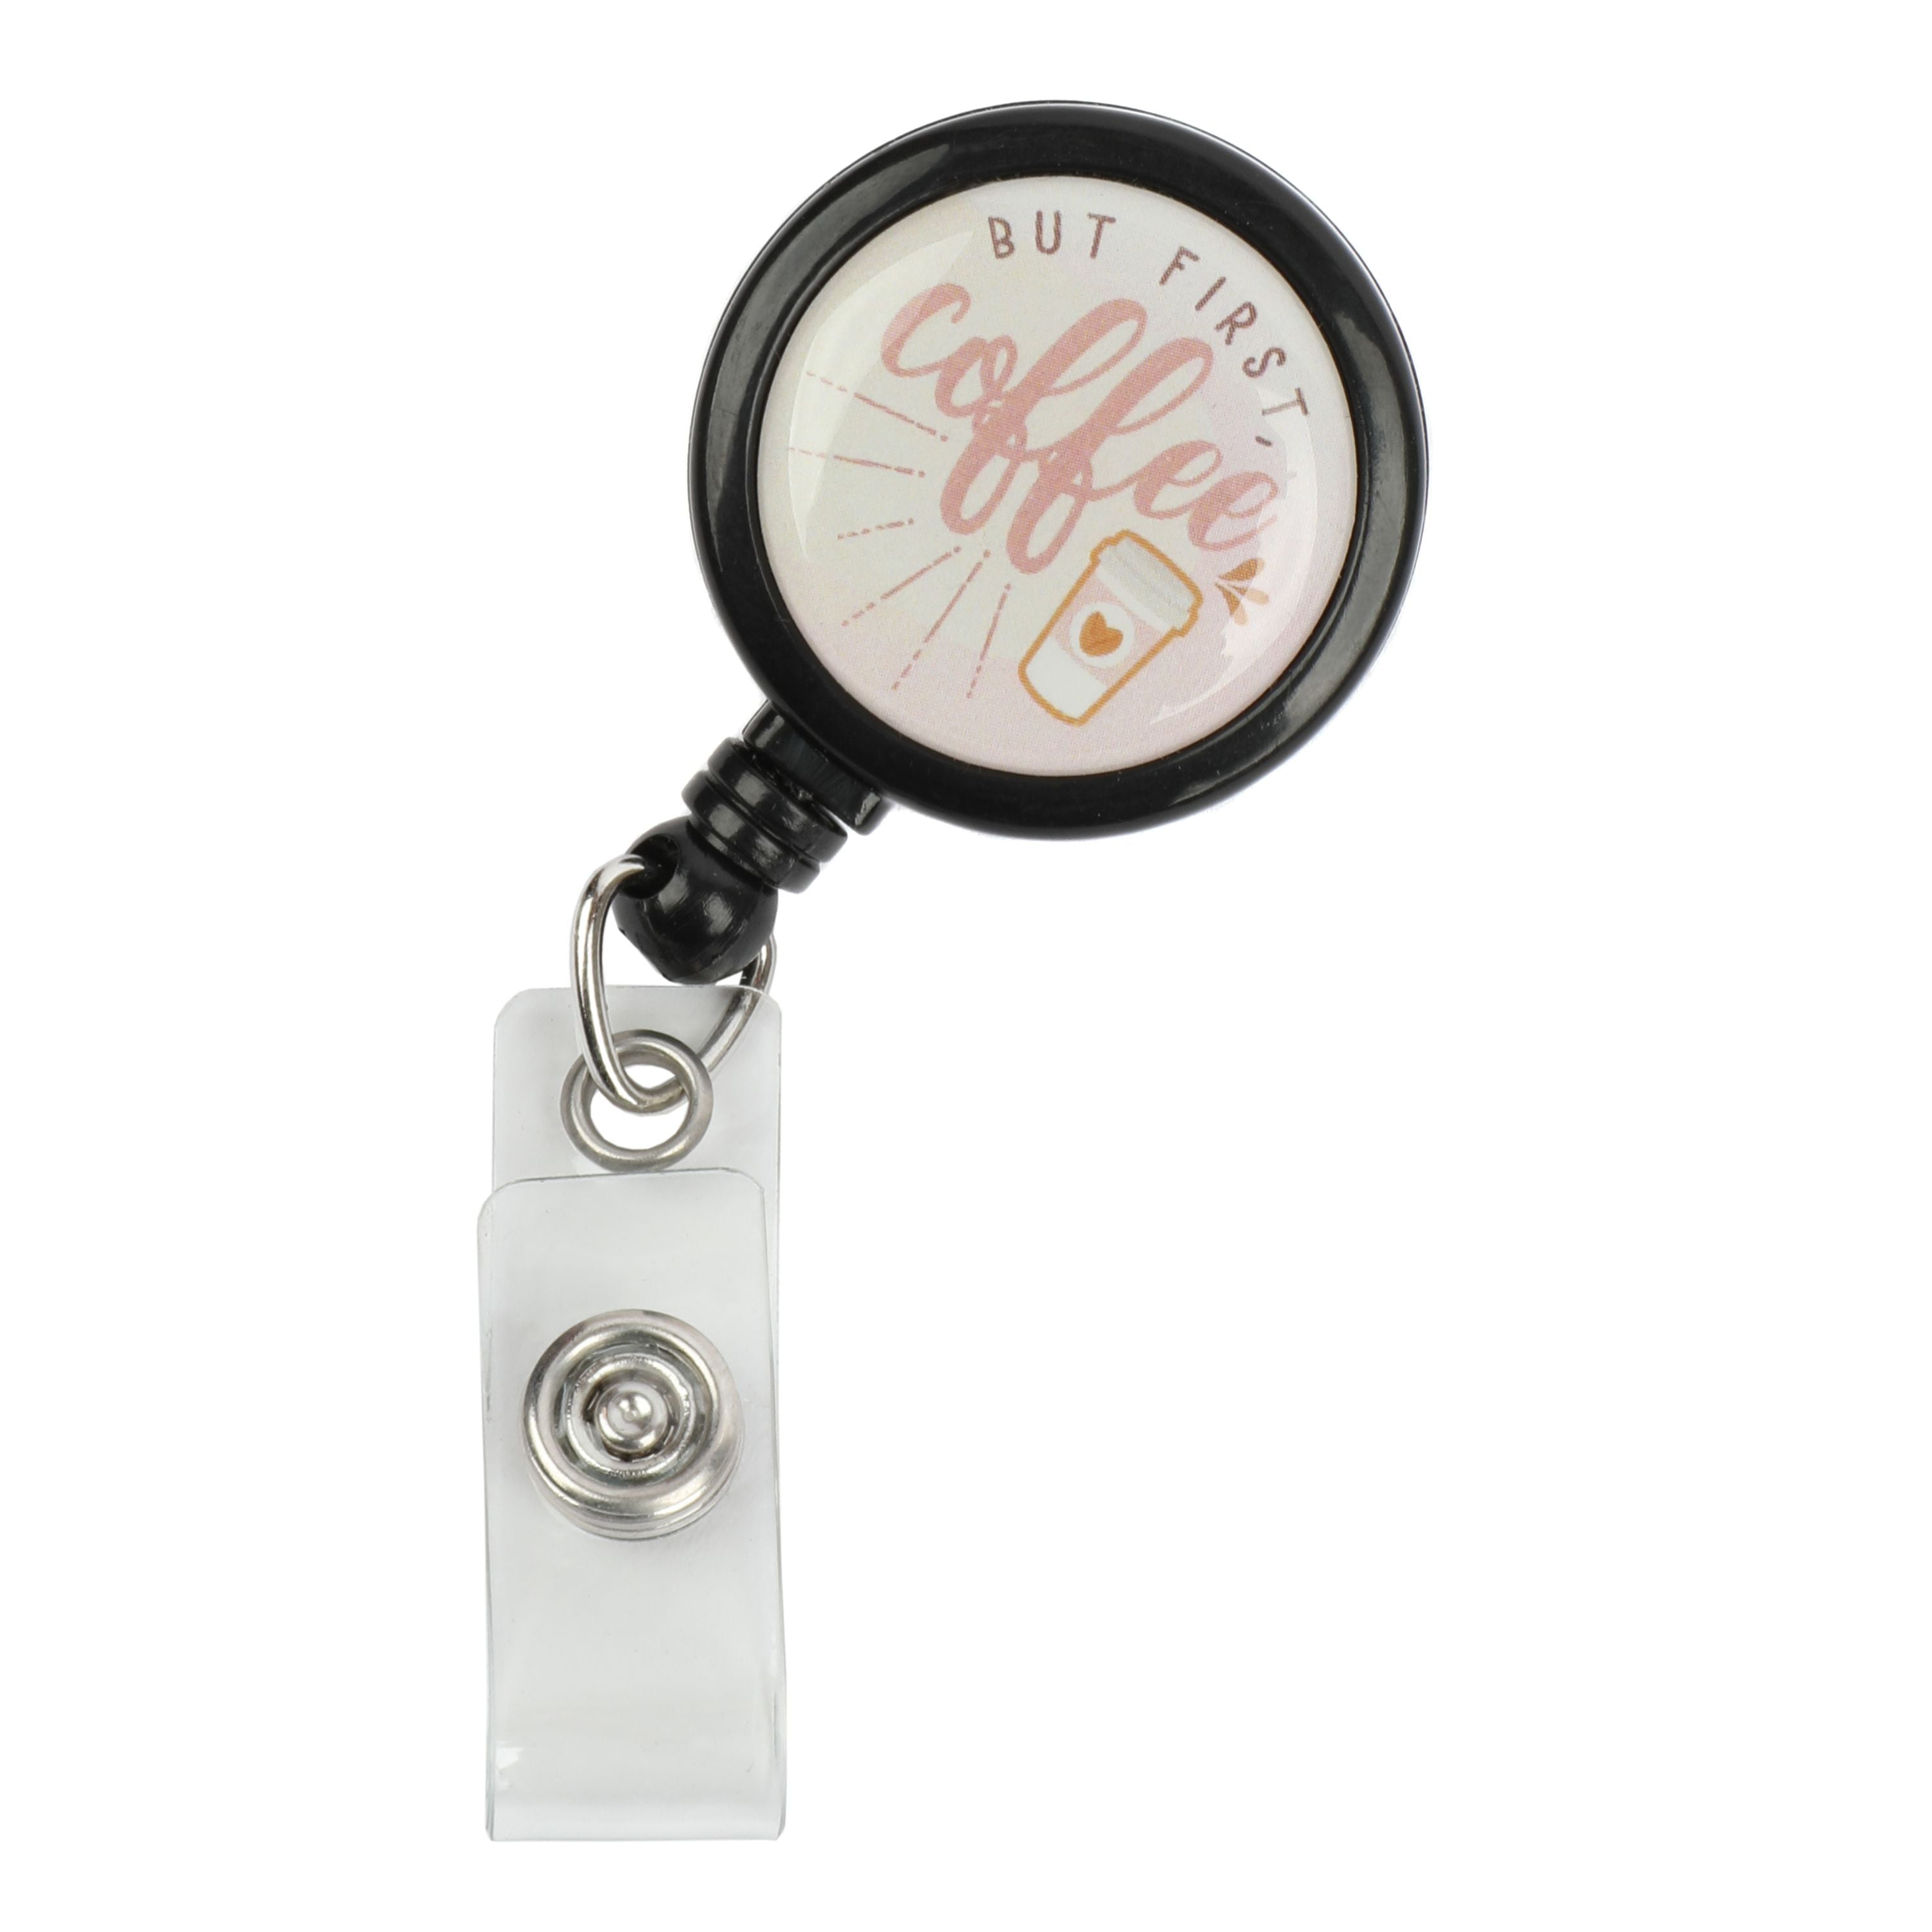 PR Essentials Brand Women's adult But First Coffee Badge Reel with Shades On Pink and Brown On Cream Background